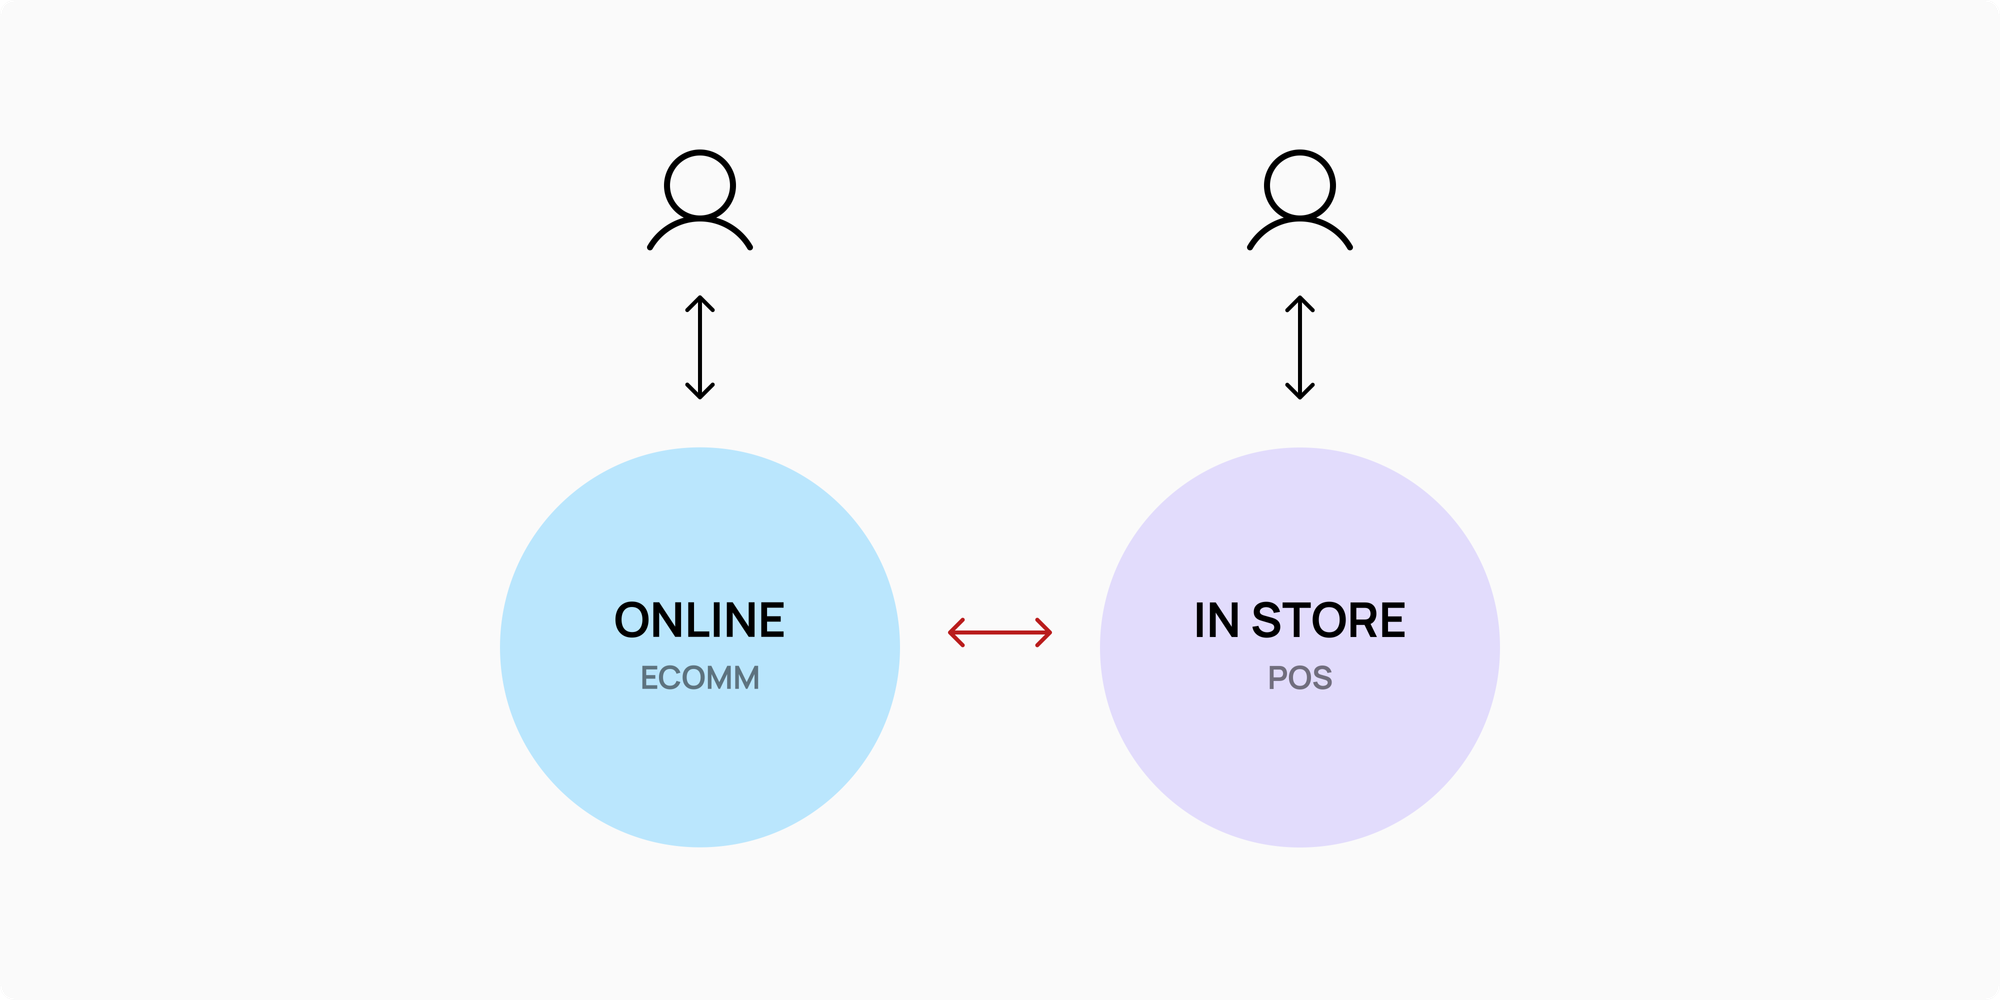 Online and in-store transactions, managed by different systems.